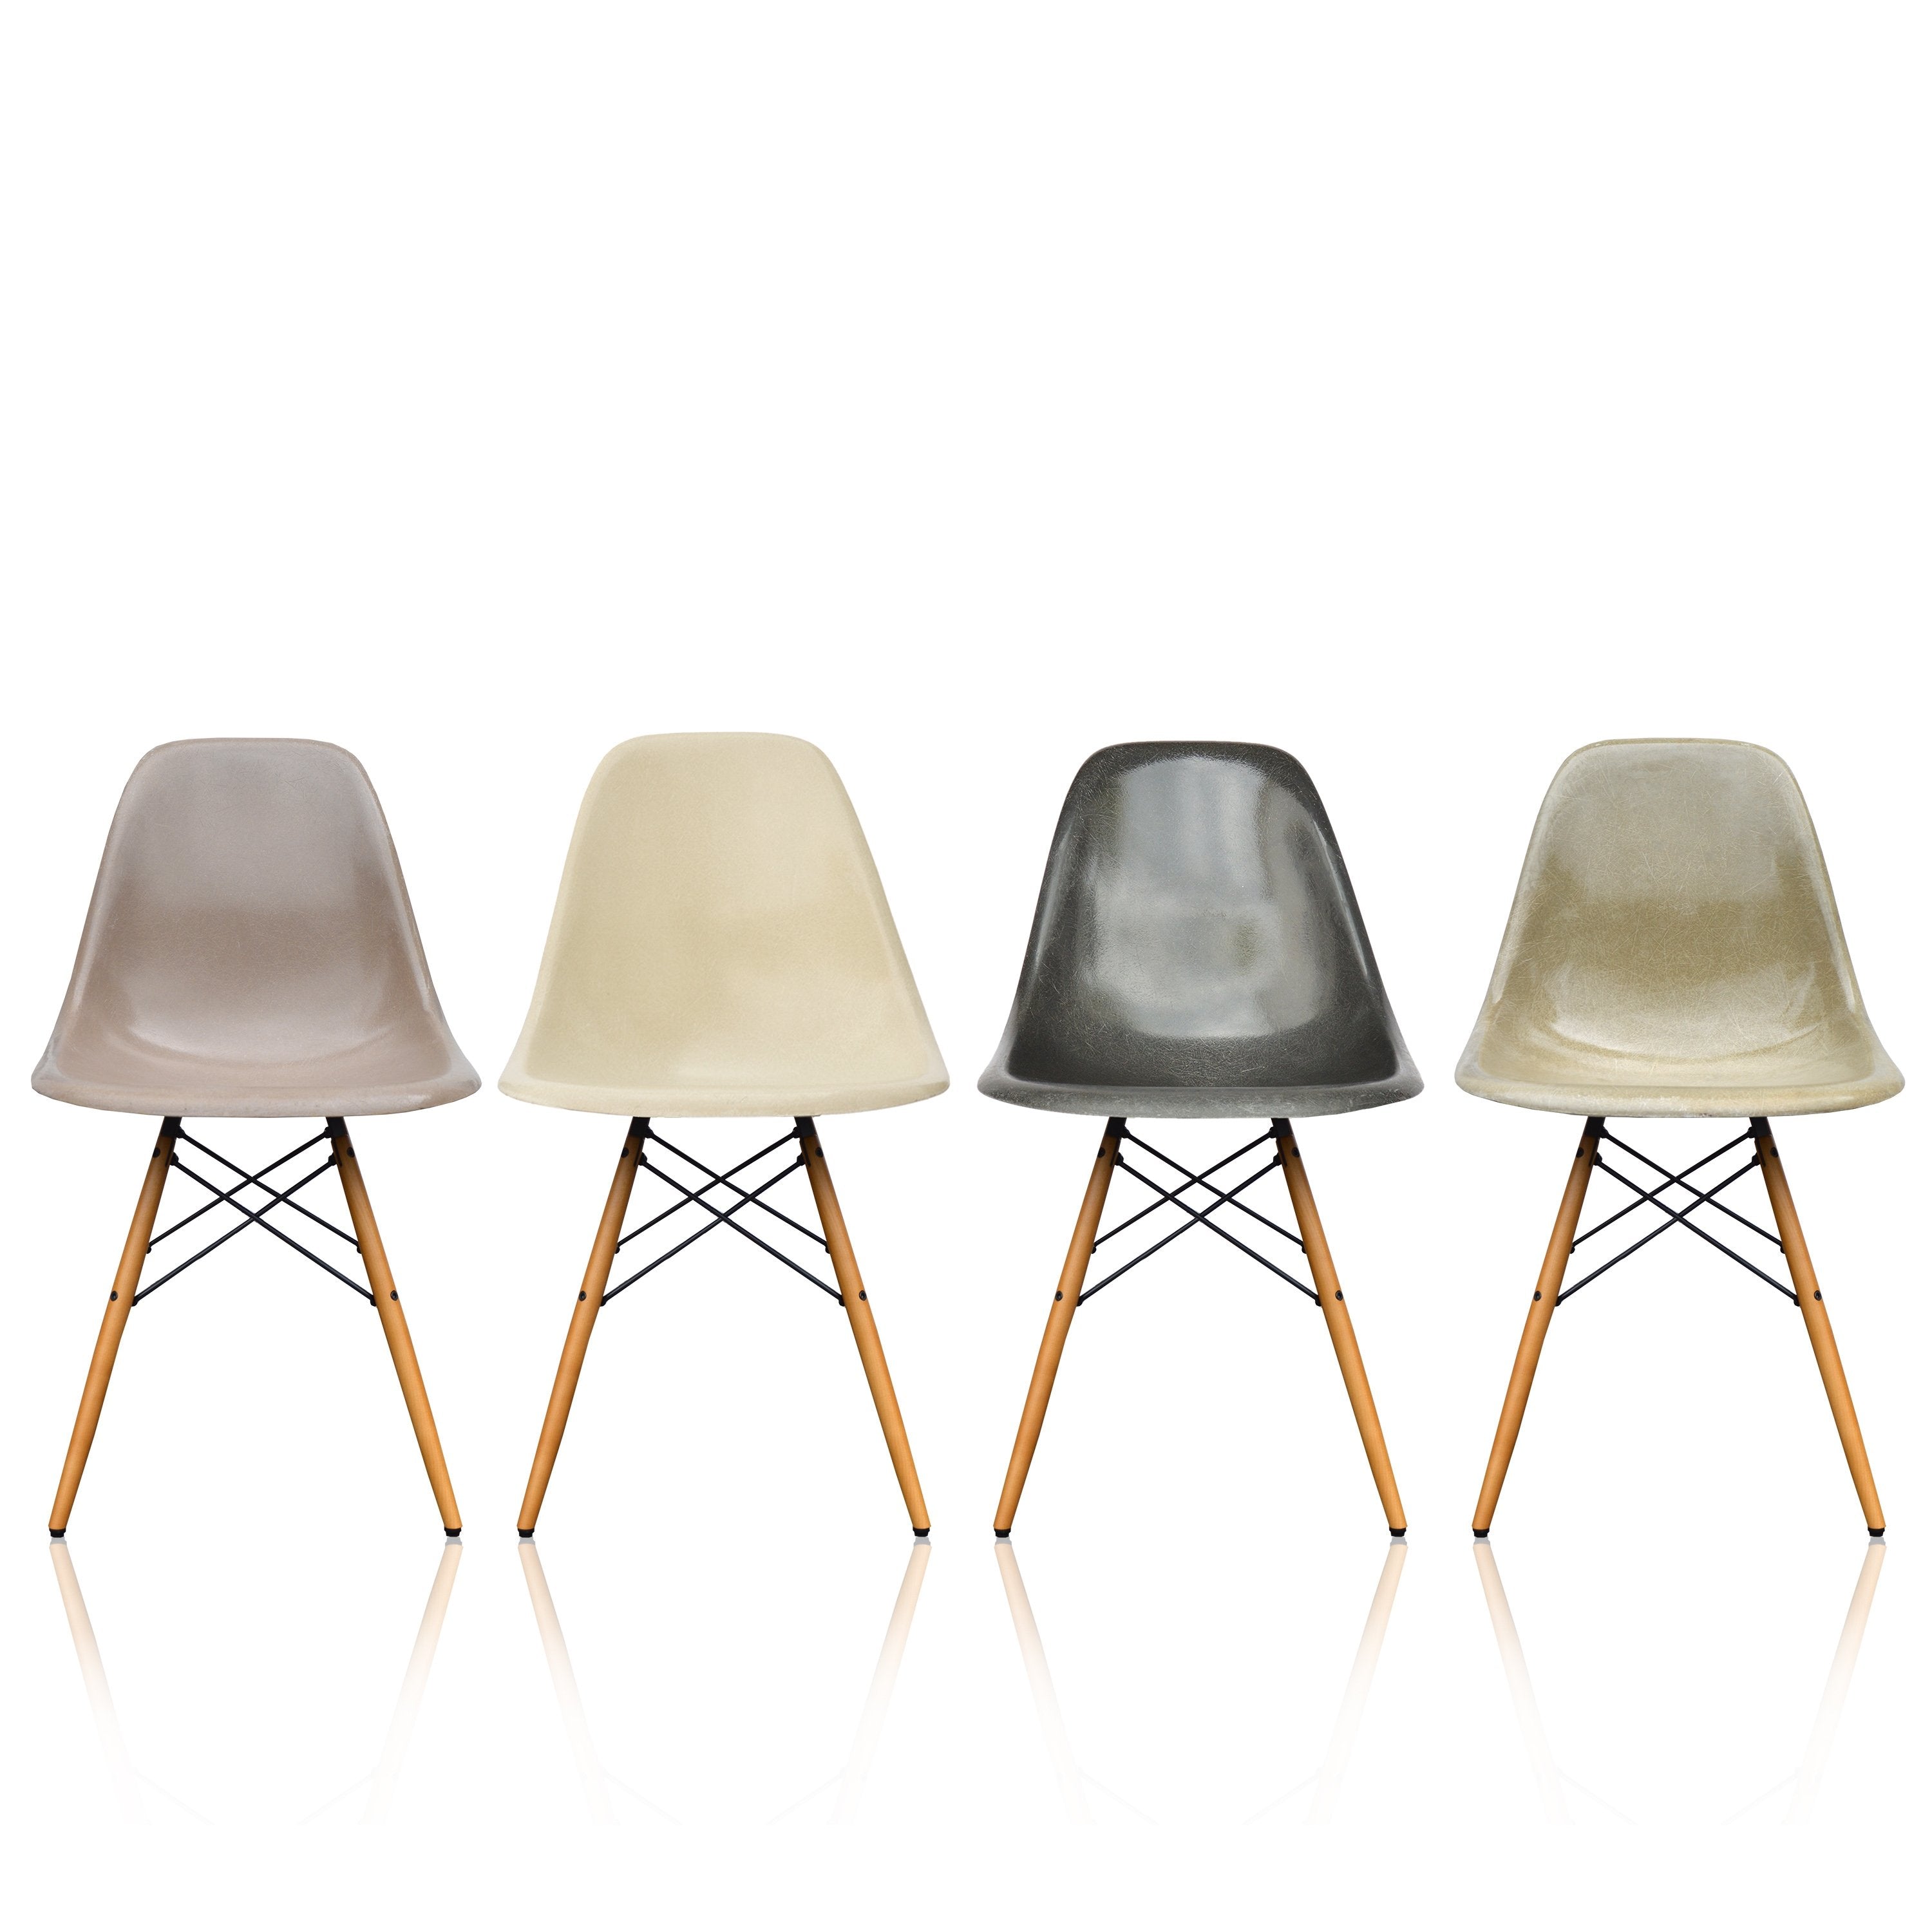 The Top Ten Iconic Chairs